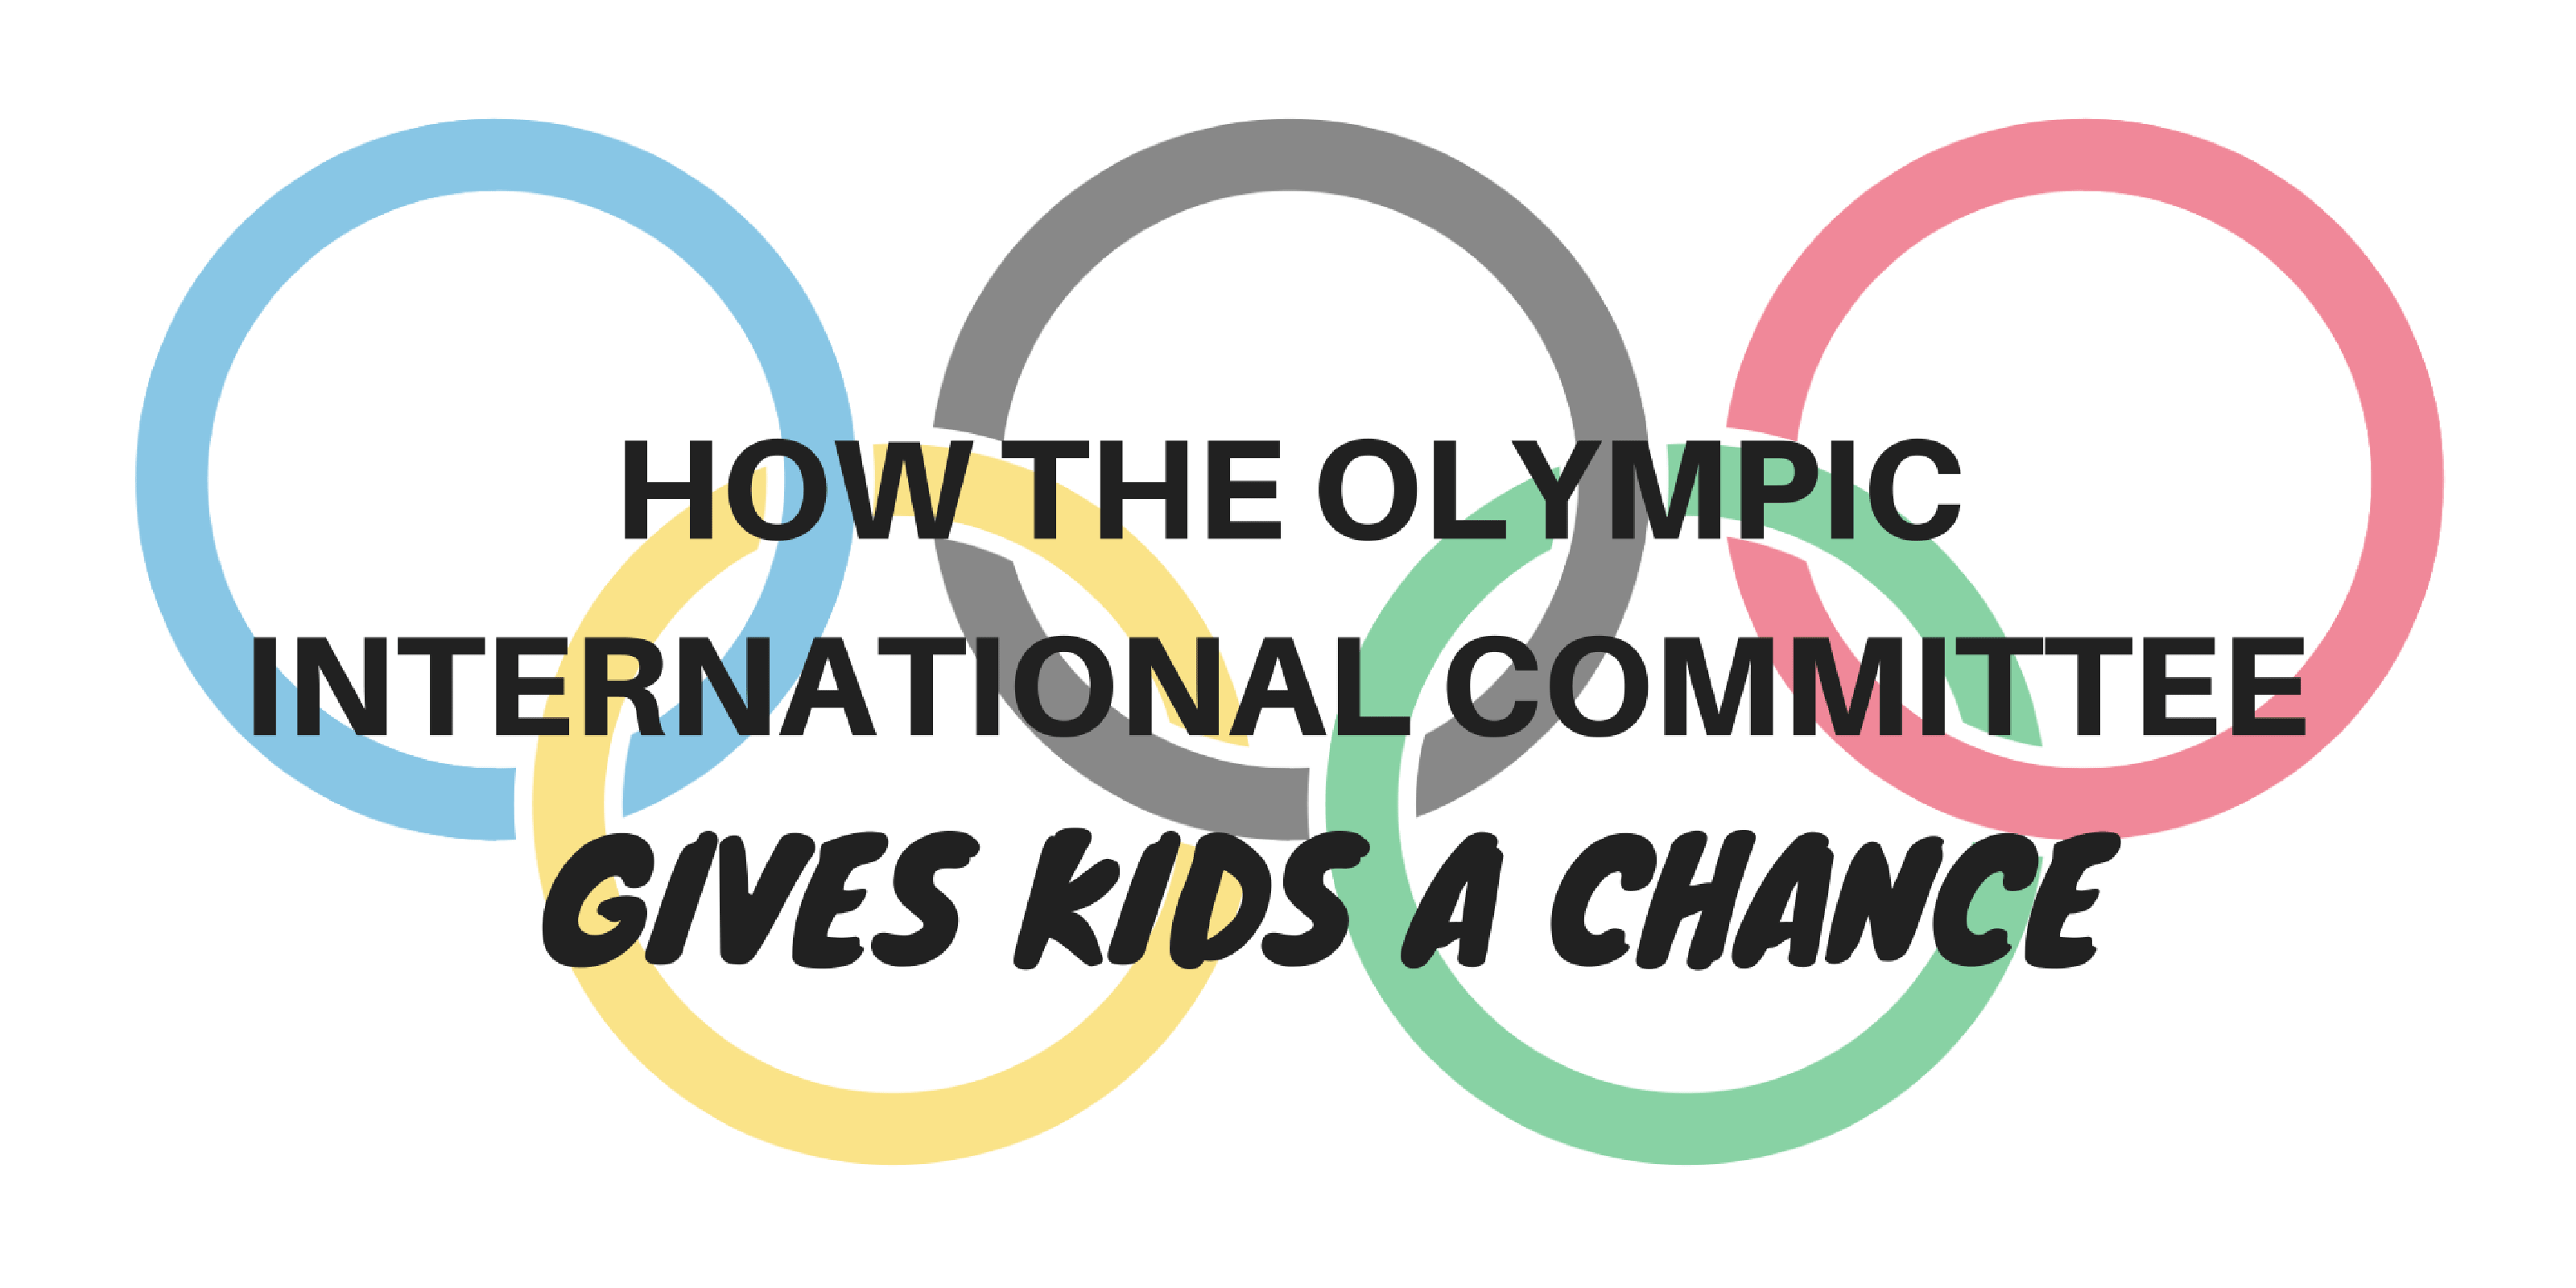 How the Olympic International Committee Gives Kids a Chance